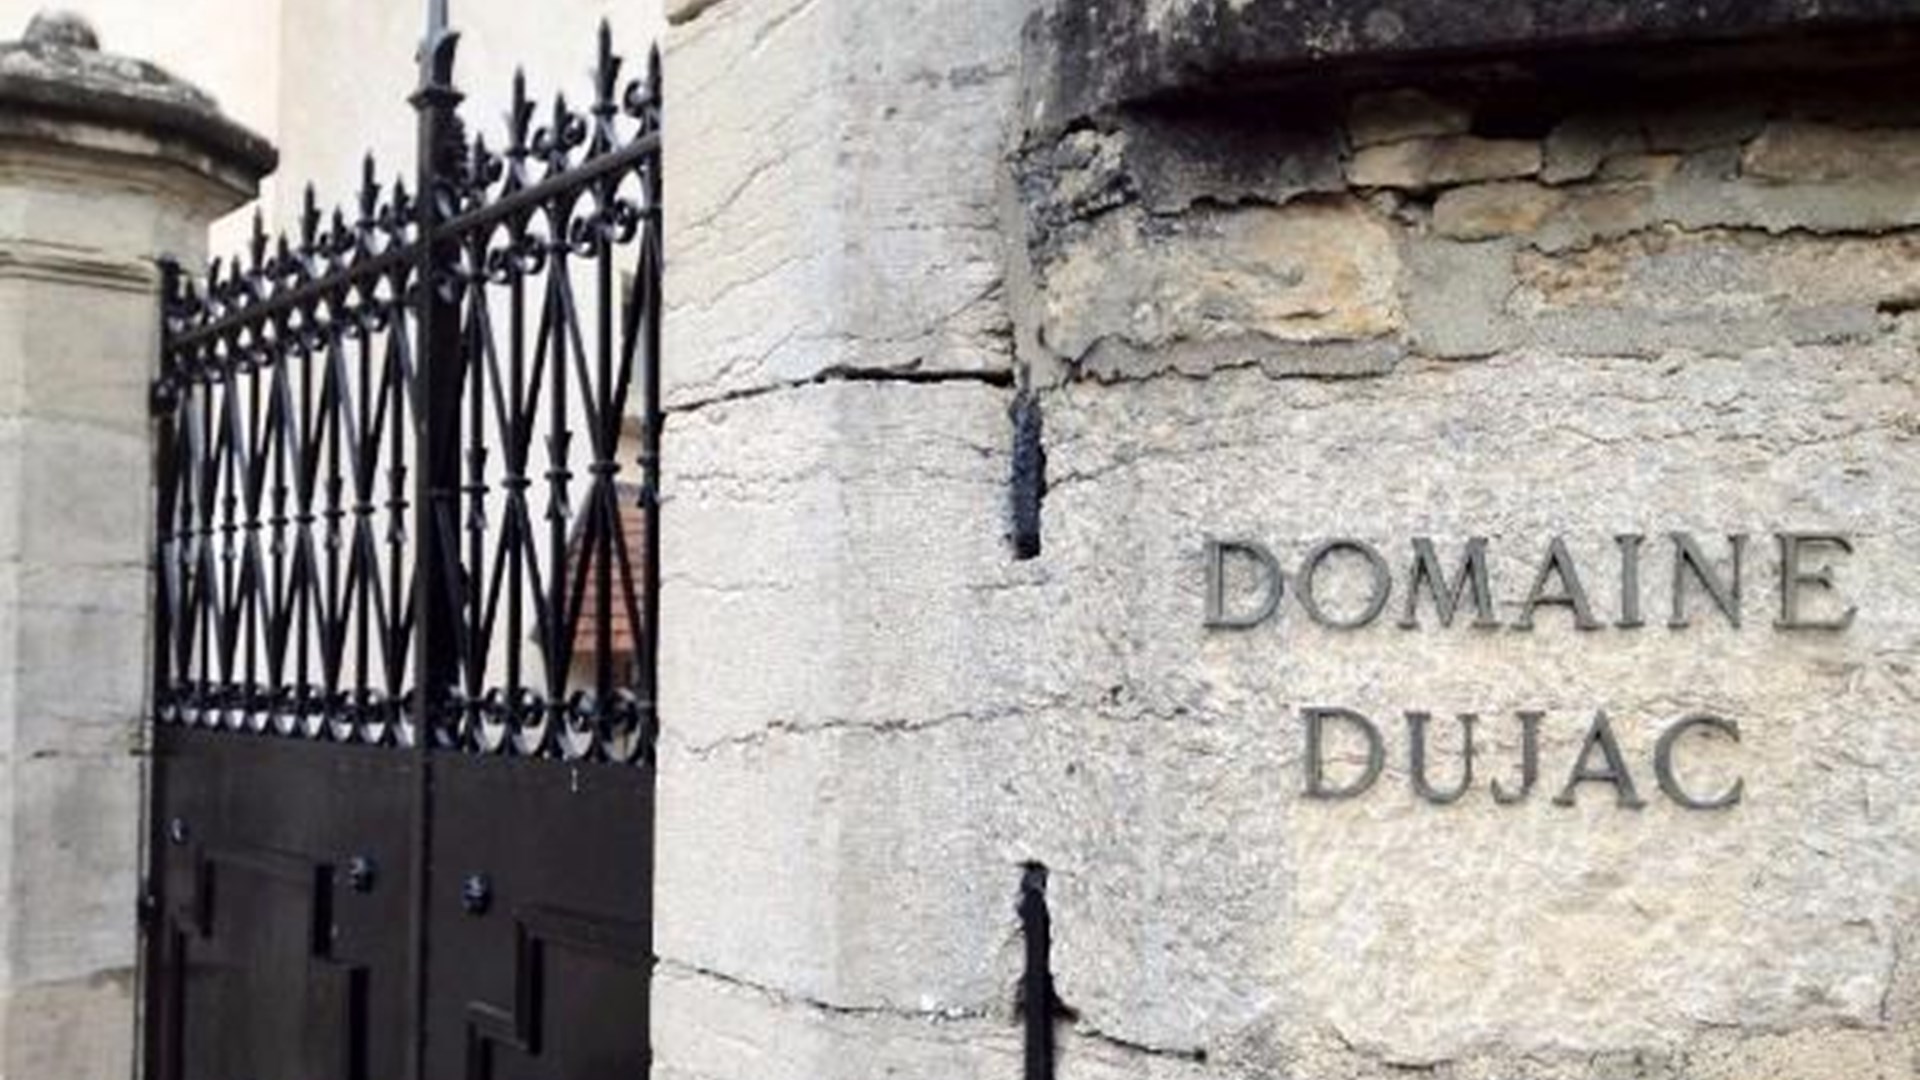 Investment in Domaine Dujac